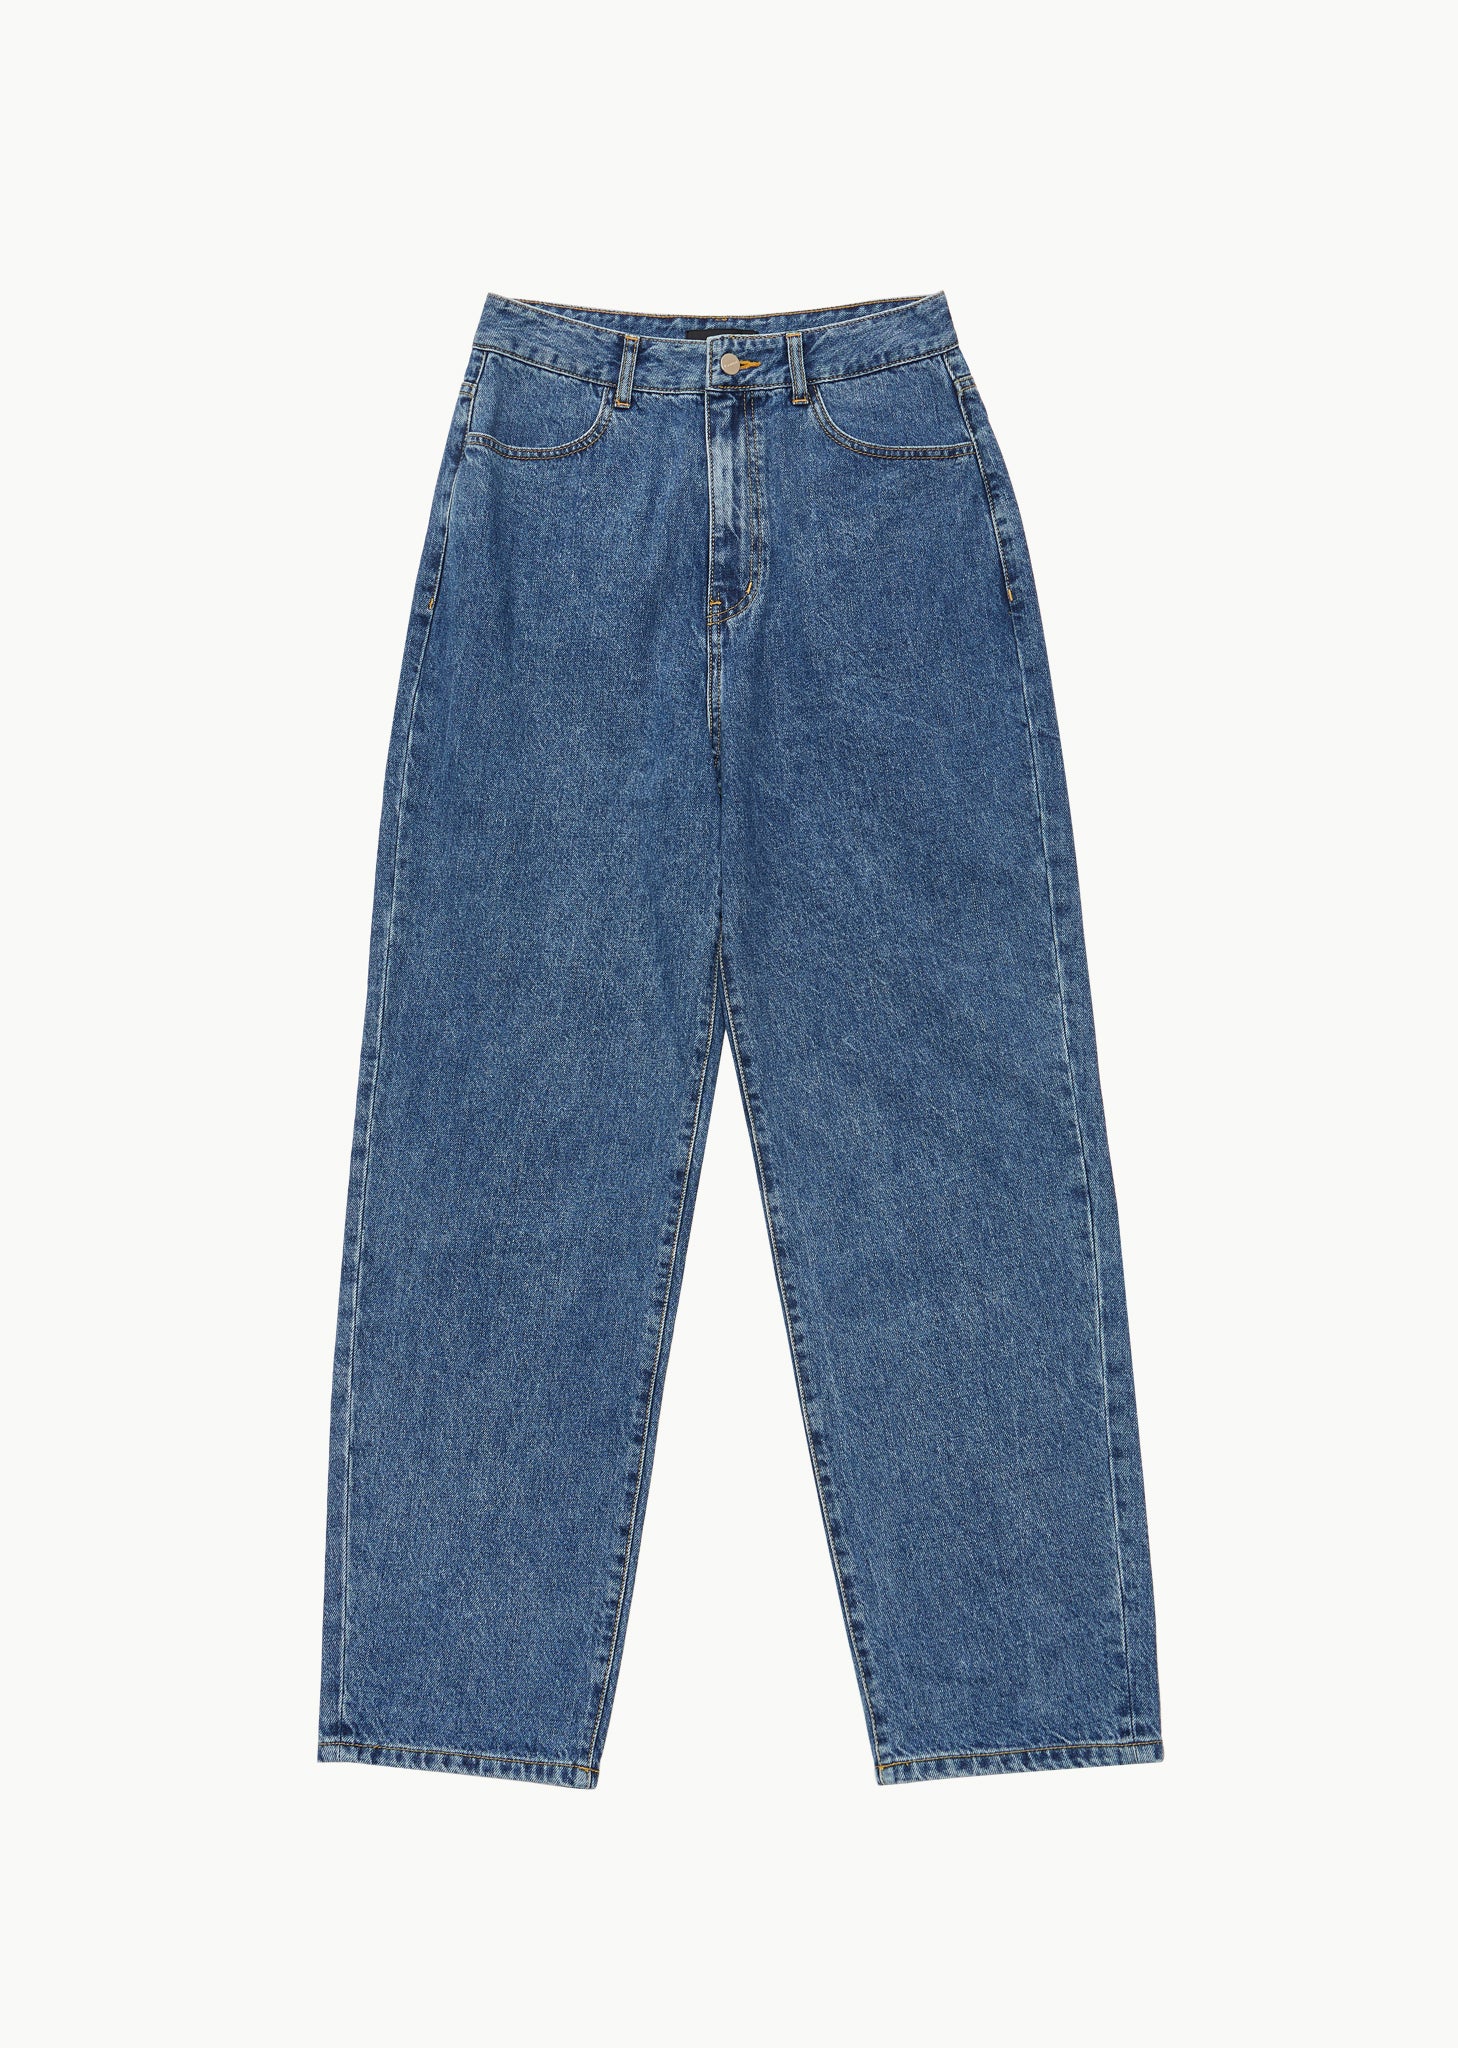 MENS RECYCLED COTTON DENIM (2 COLORS)